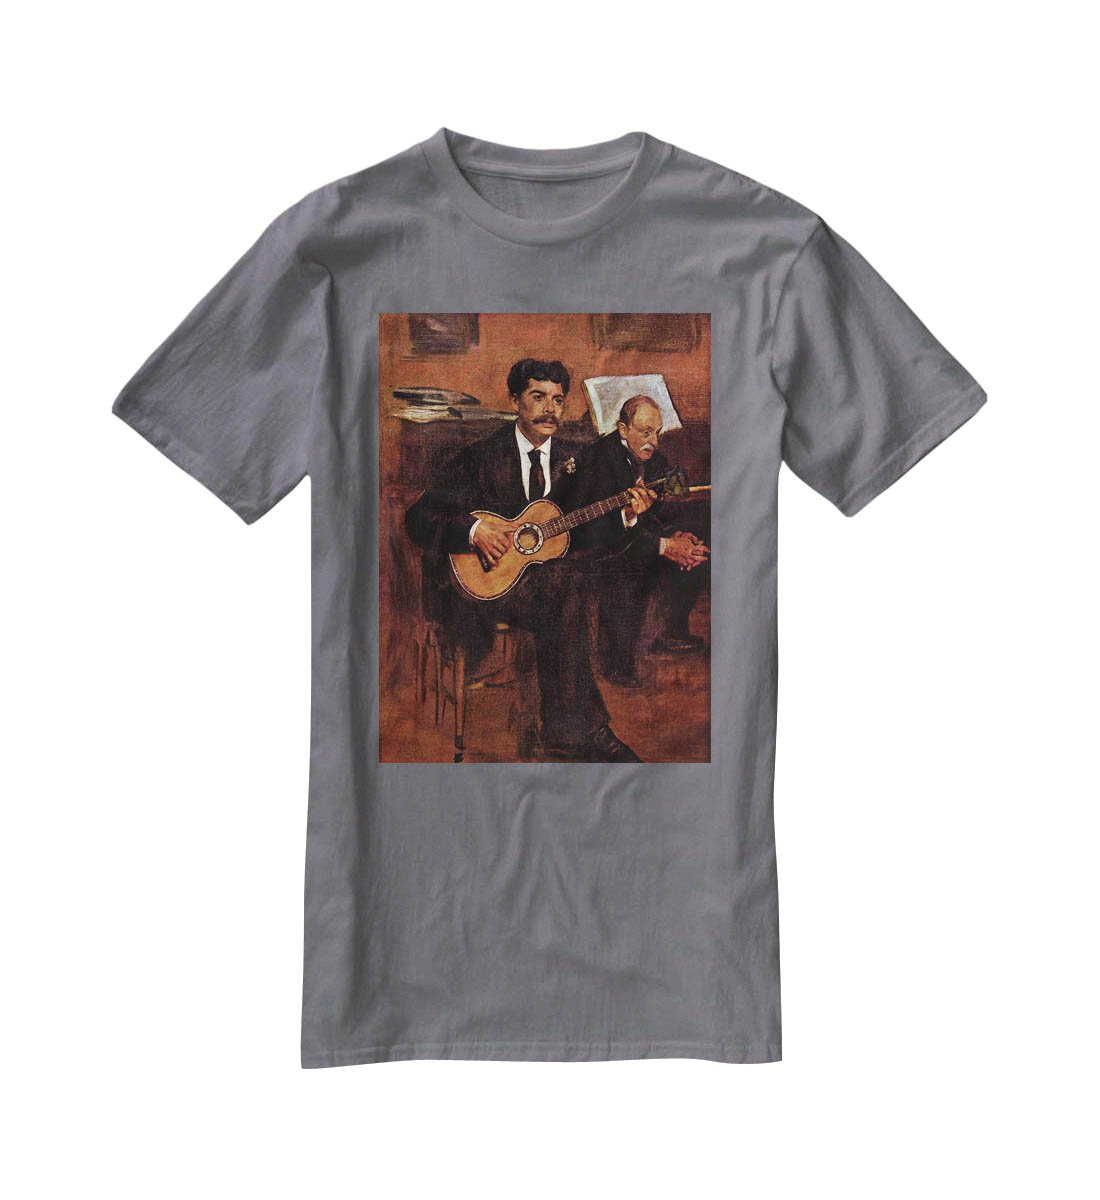 The guitarist Pagans and Monsieur Degas by Manet T-Shirt - Canvas Art Rocks - 3